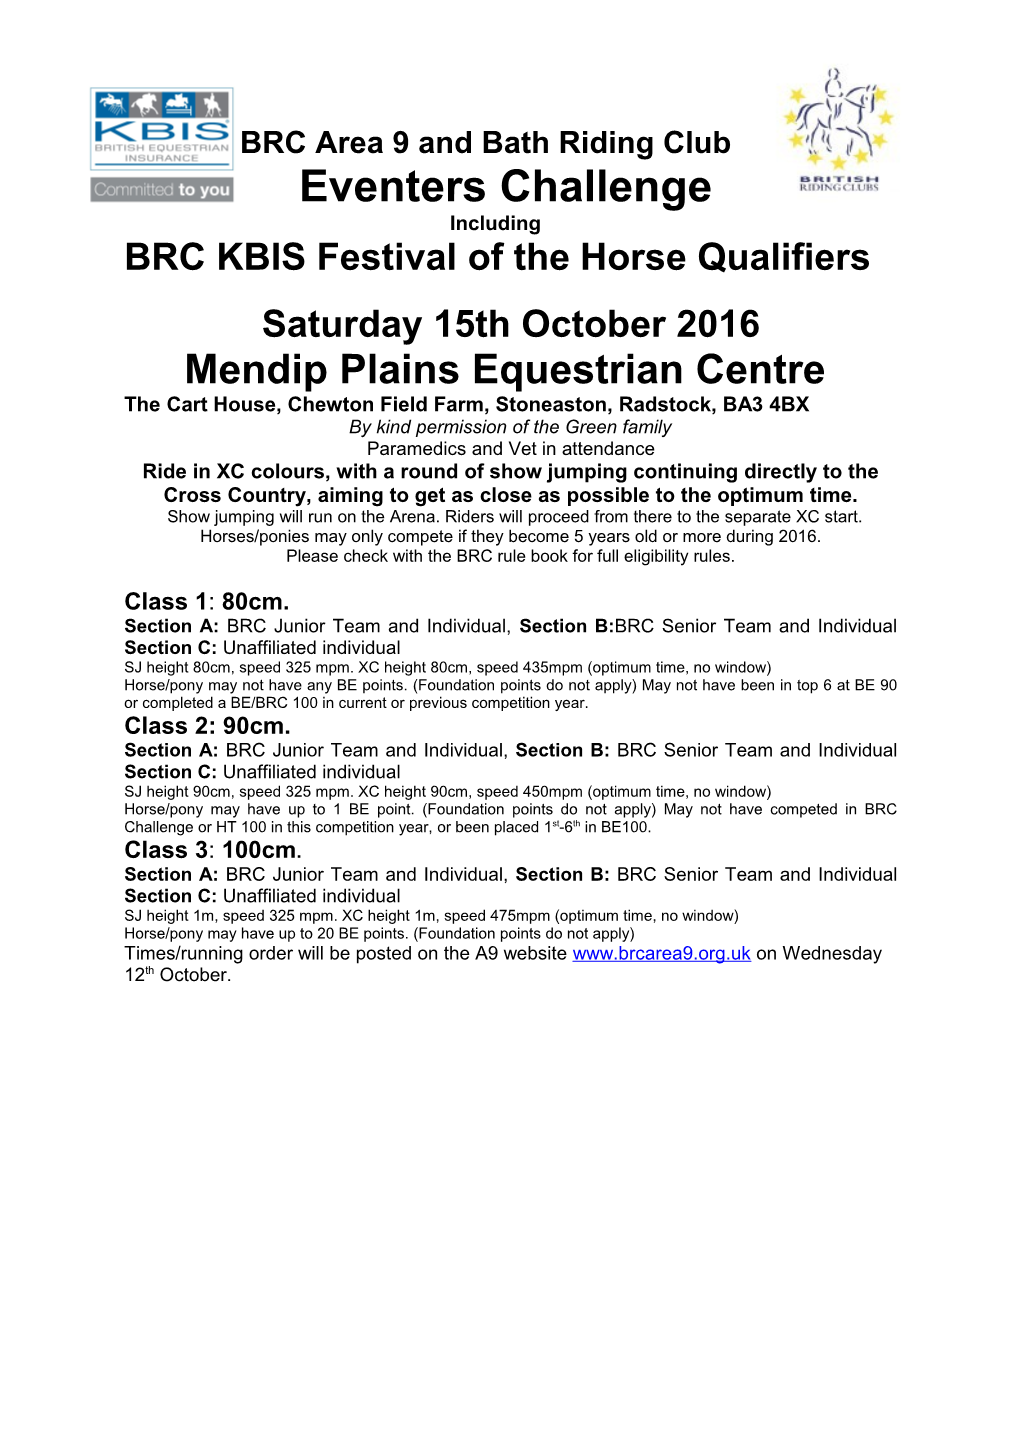 BRC KBIS Festival of the Horse Qualifiers